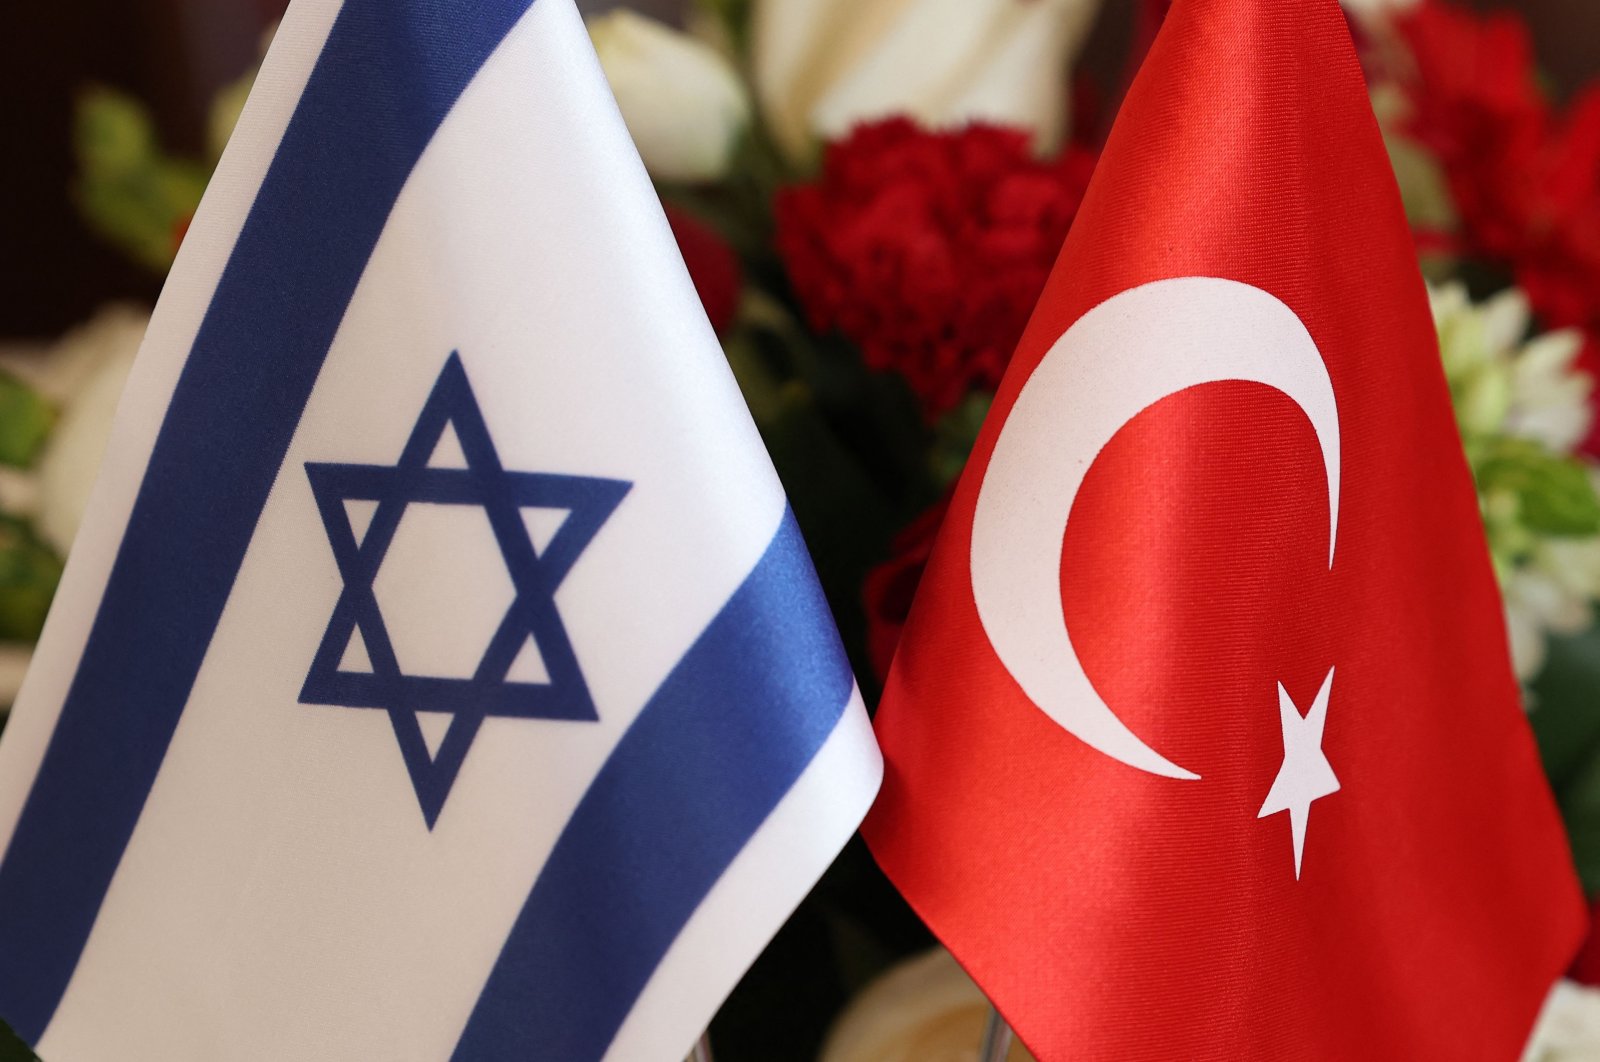 The Turkish (R) and Israeli flags are pictured at a meeting between Foreign Minister Mevlüt Çavuşoğlu and Israeli businesspeople, in Tel Aviv, Israel. May 25, 2022. (AFP Photo)